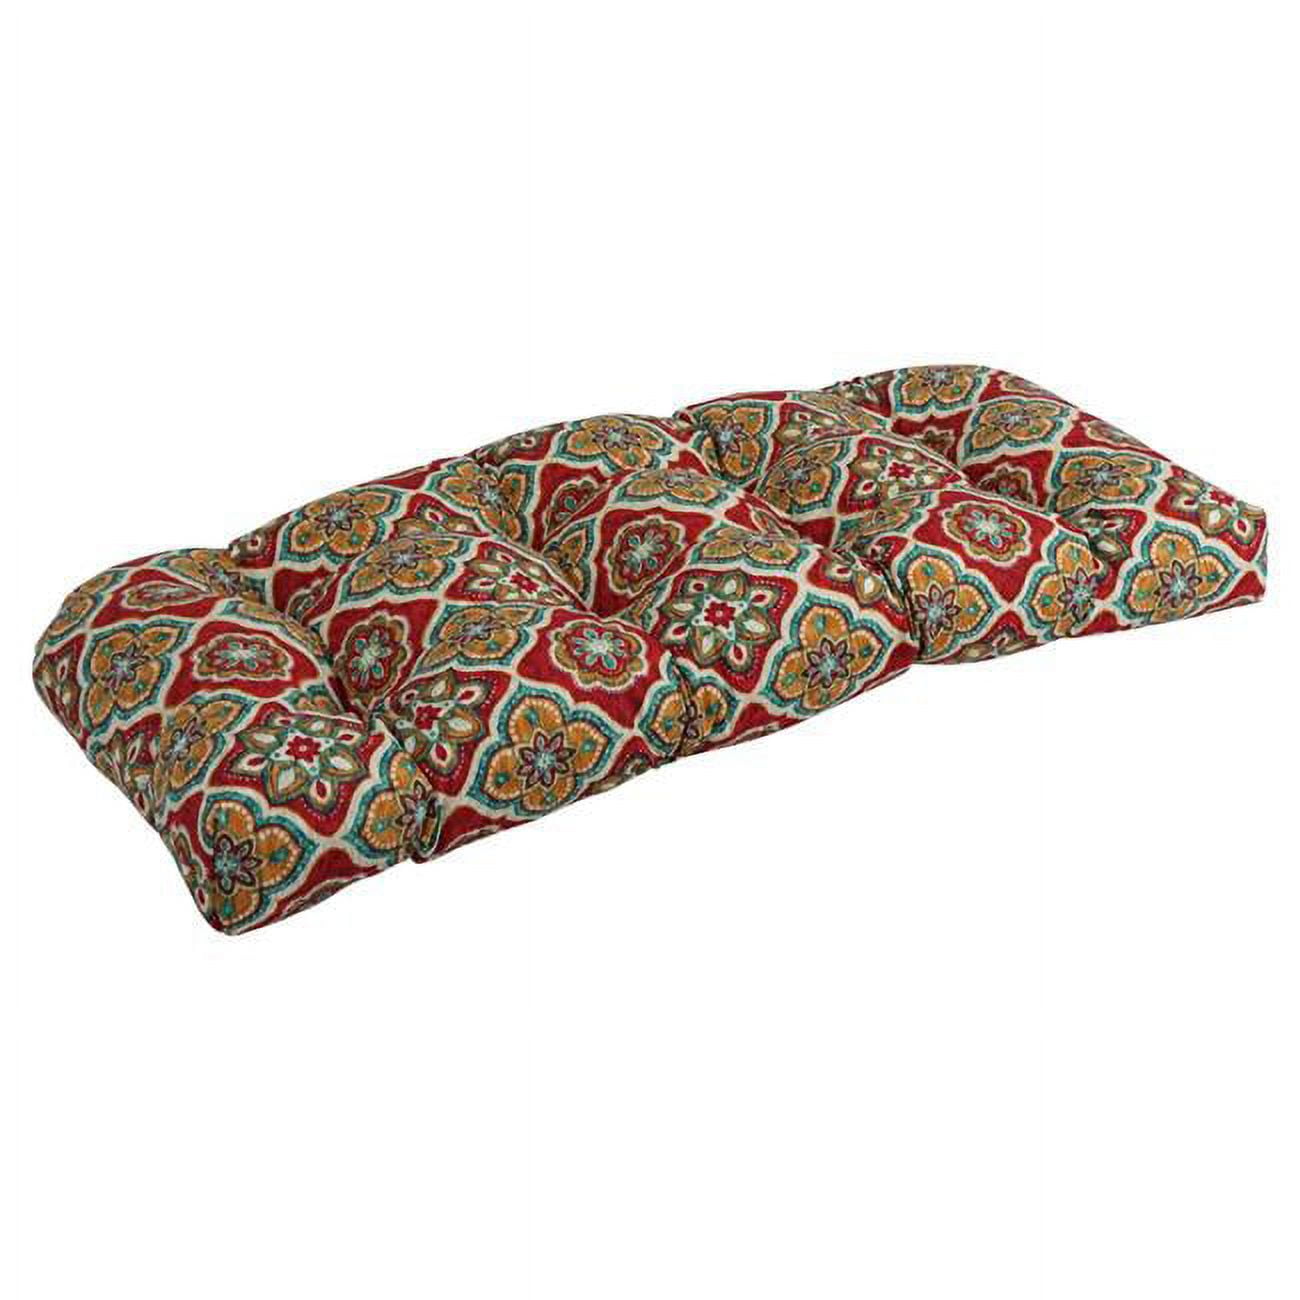 Picture of Blazing Needles 93180-LS-REO-63 42 x 19 in. U-Shaped Patterned Spun Polyester Tufted Settee & Bench Cushion&#44; Adonis Jewel